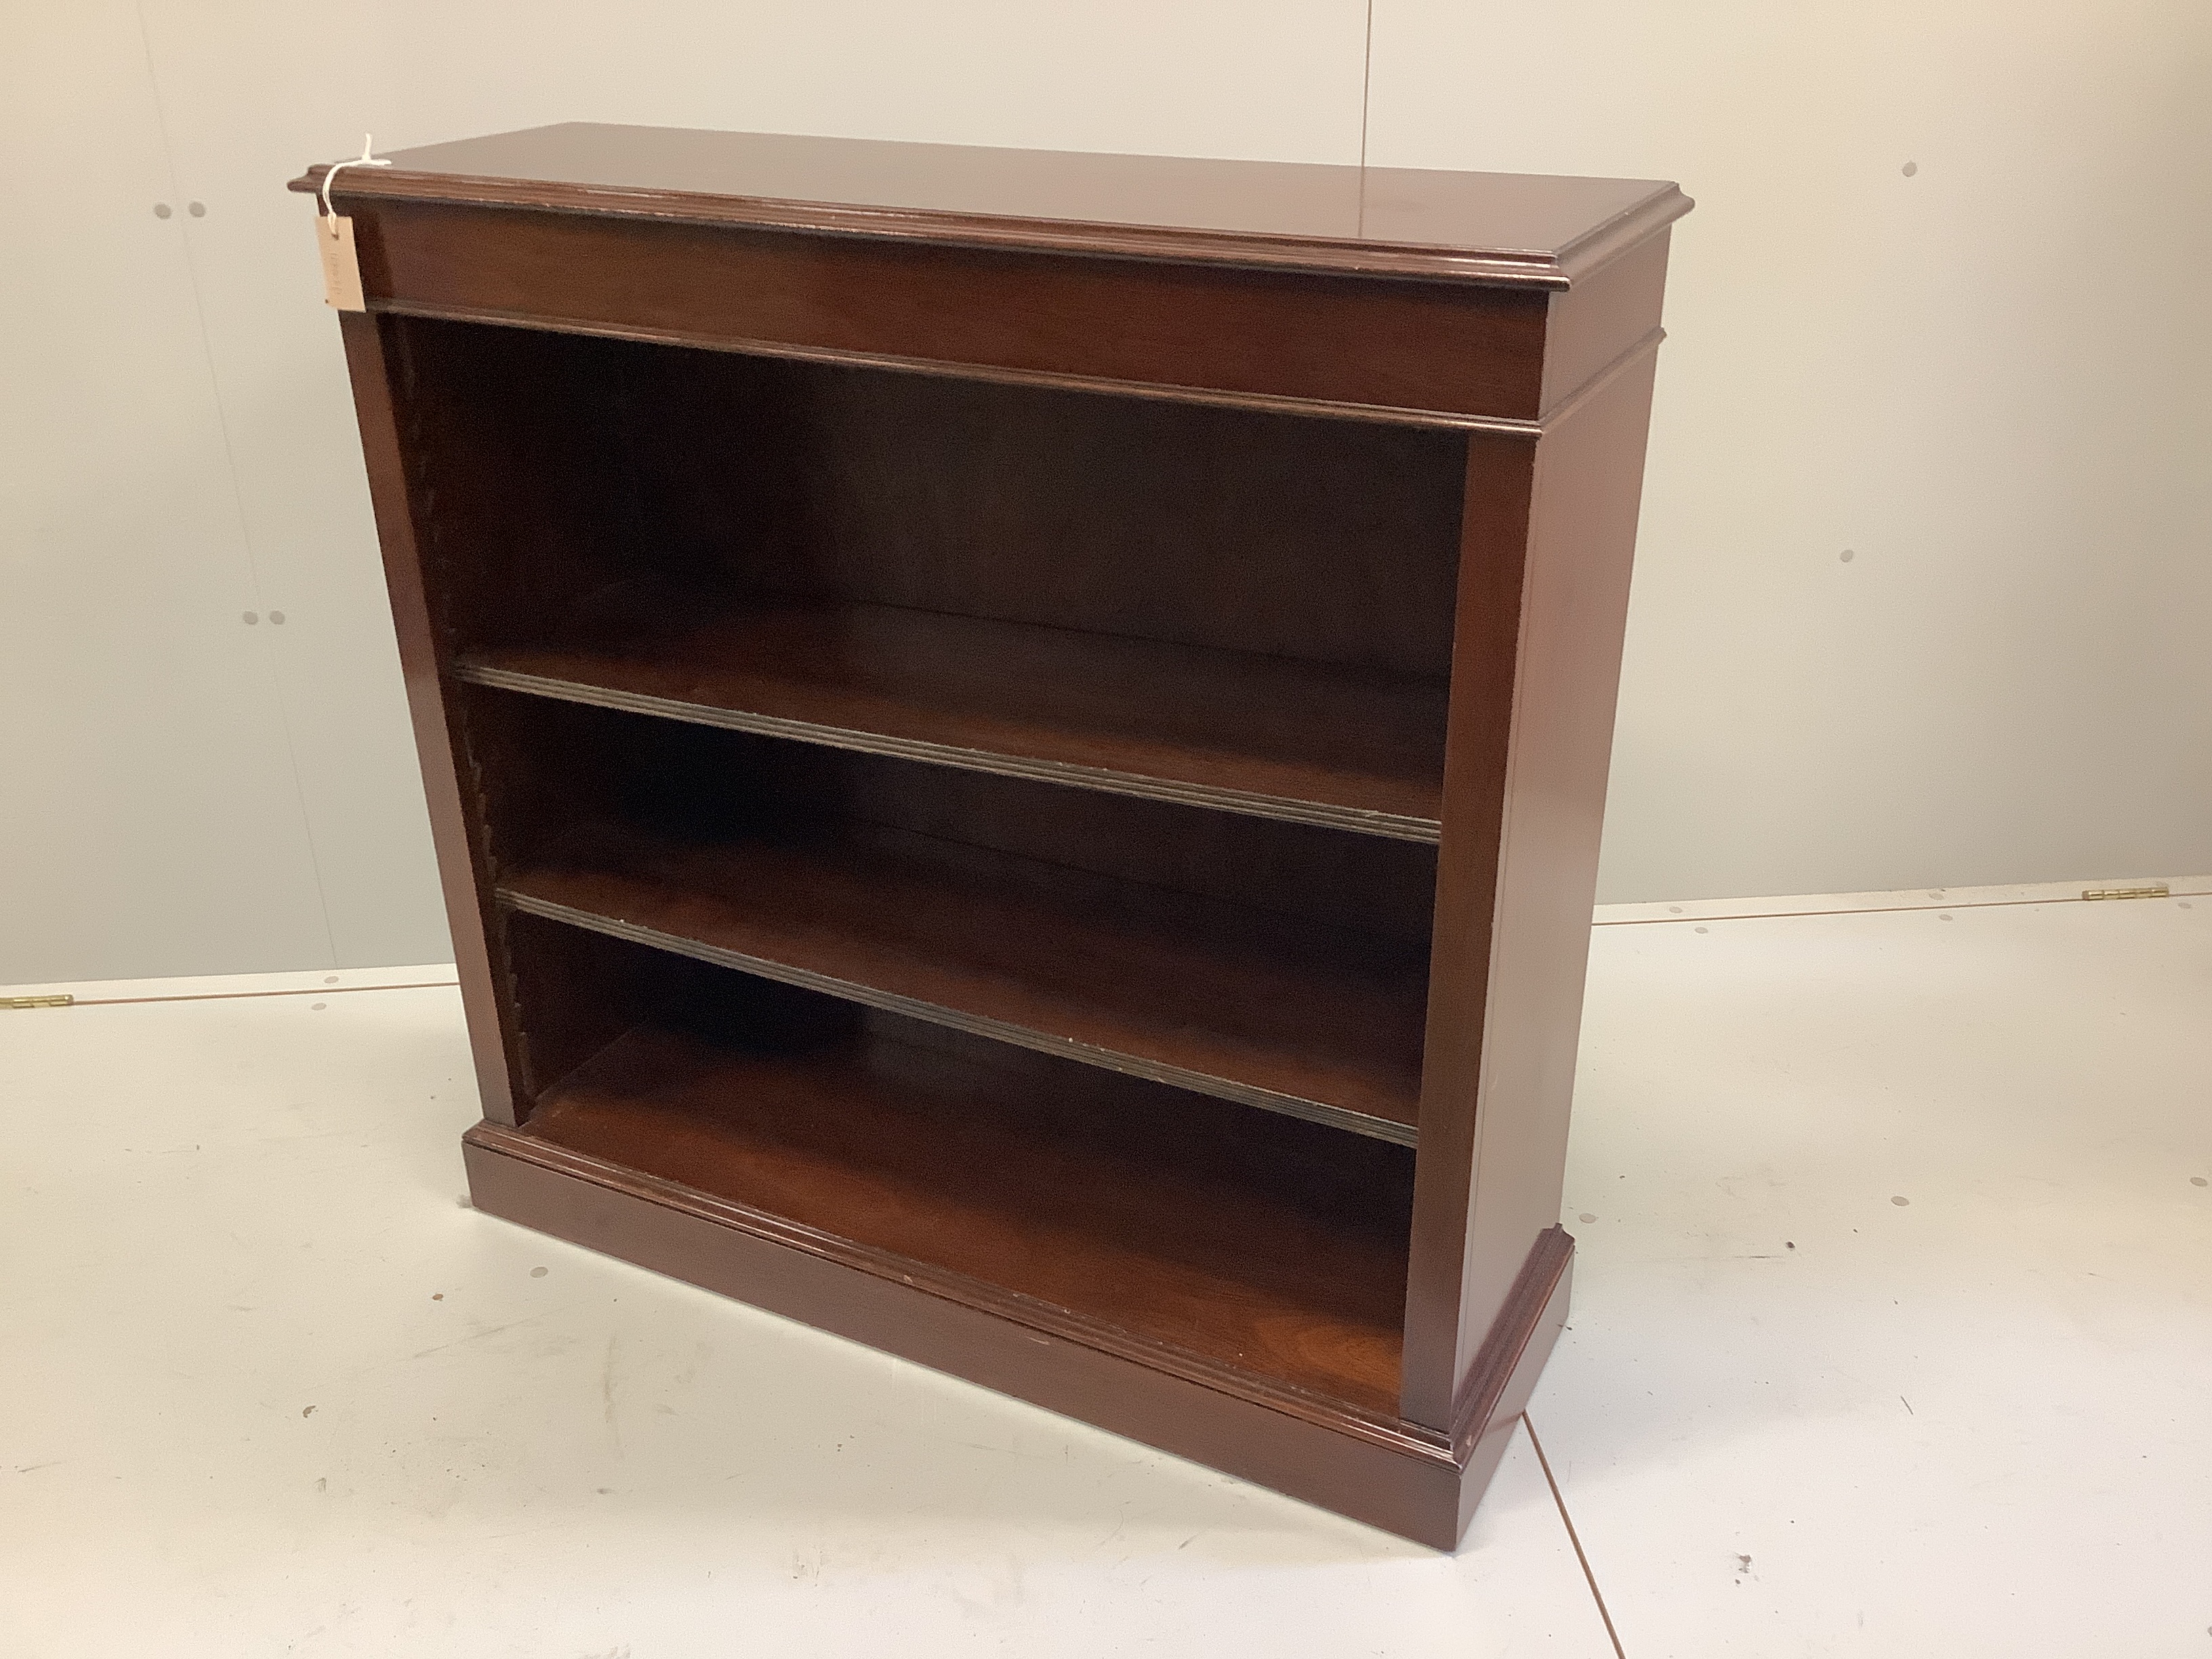 A reproduction Victorian style mahogany open bookcase, width 102cm, depth 32cm, height 100cm